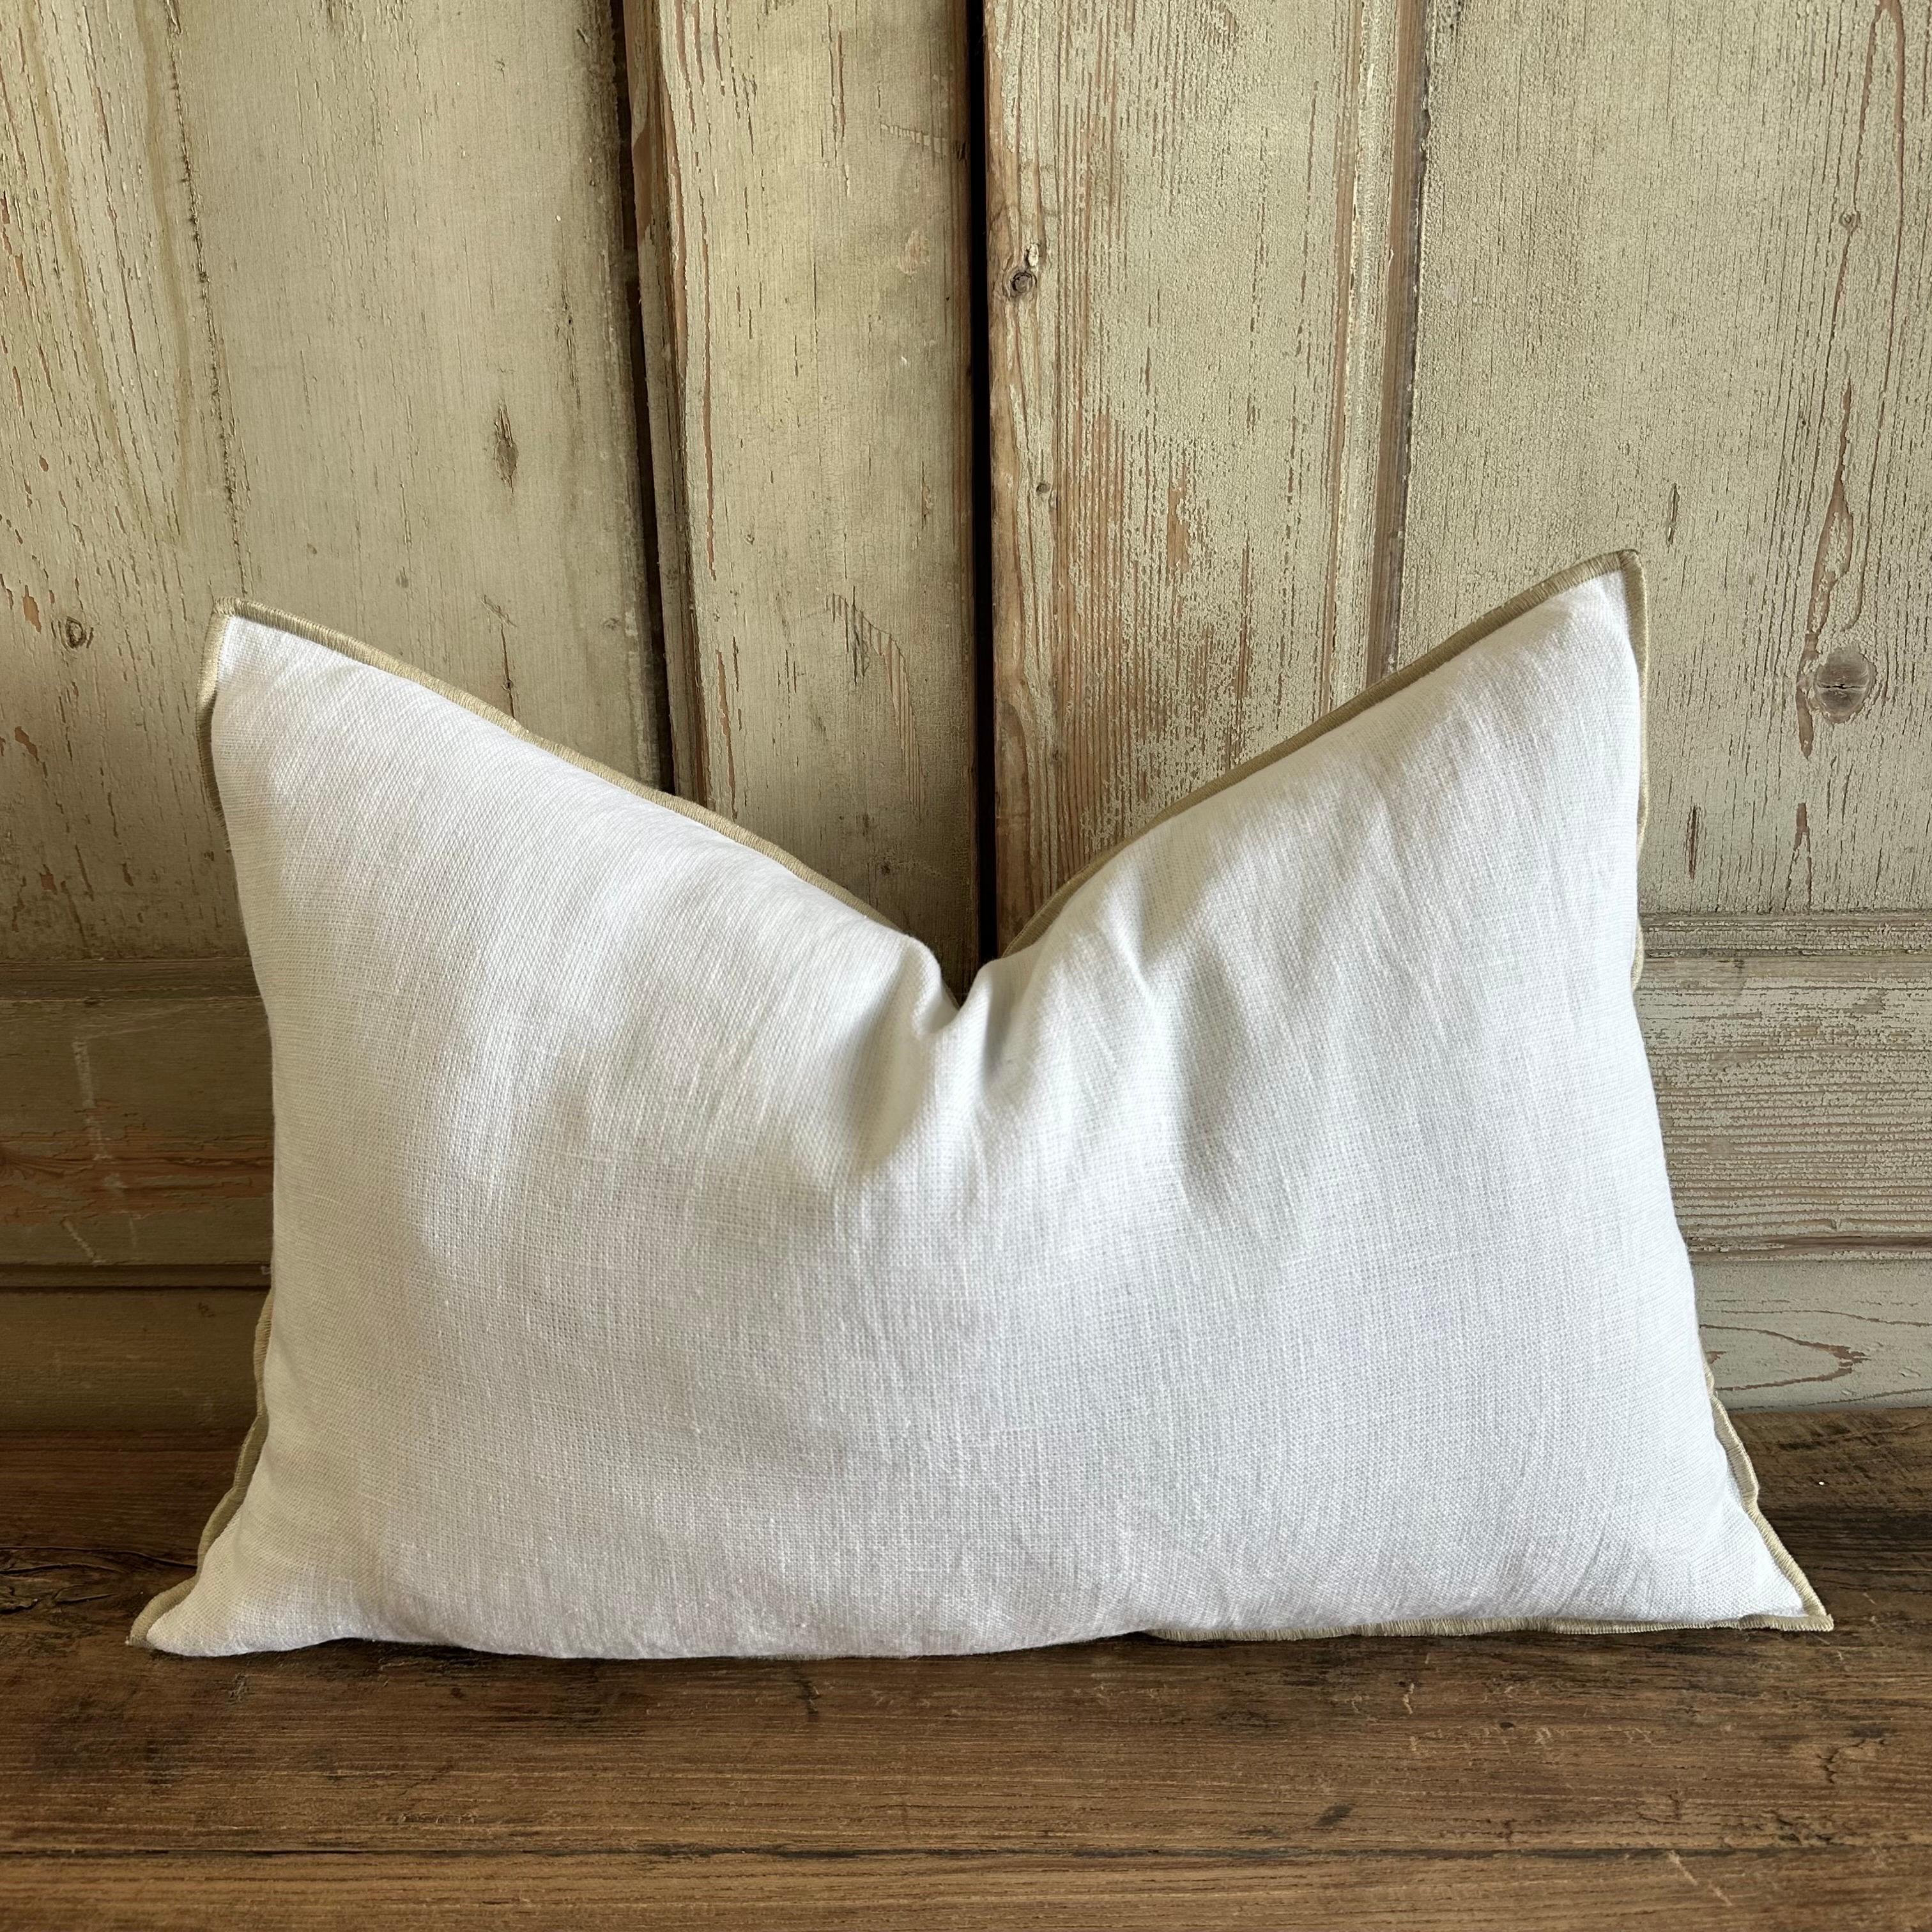 A Beautiful 100% linen pillow with decorative stitched edge. Zipper closure, 90/10 down feather pillow is included.
Size: 16x24
Color: White with a natural stitched edge
Composition
100% linen, natural finish, european flax label
Made in France.